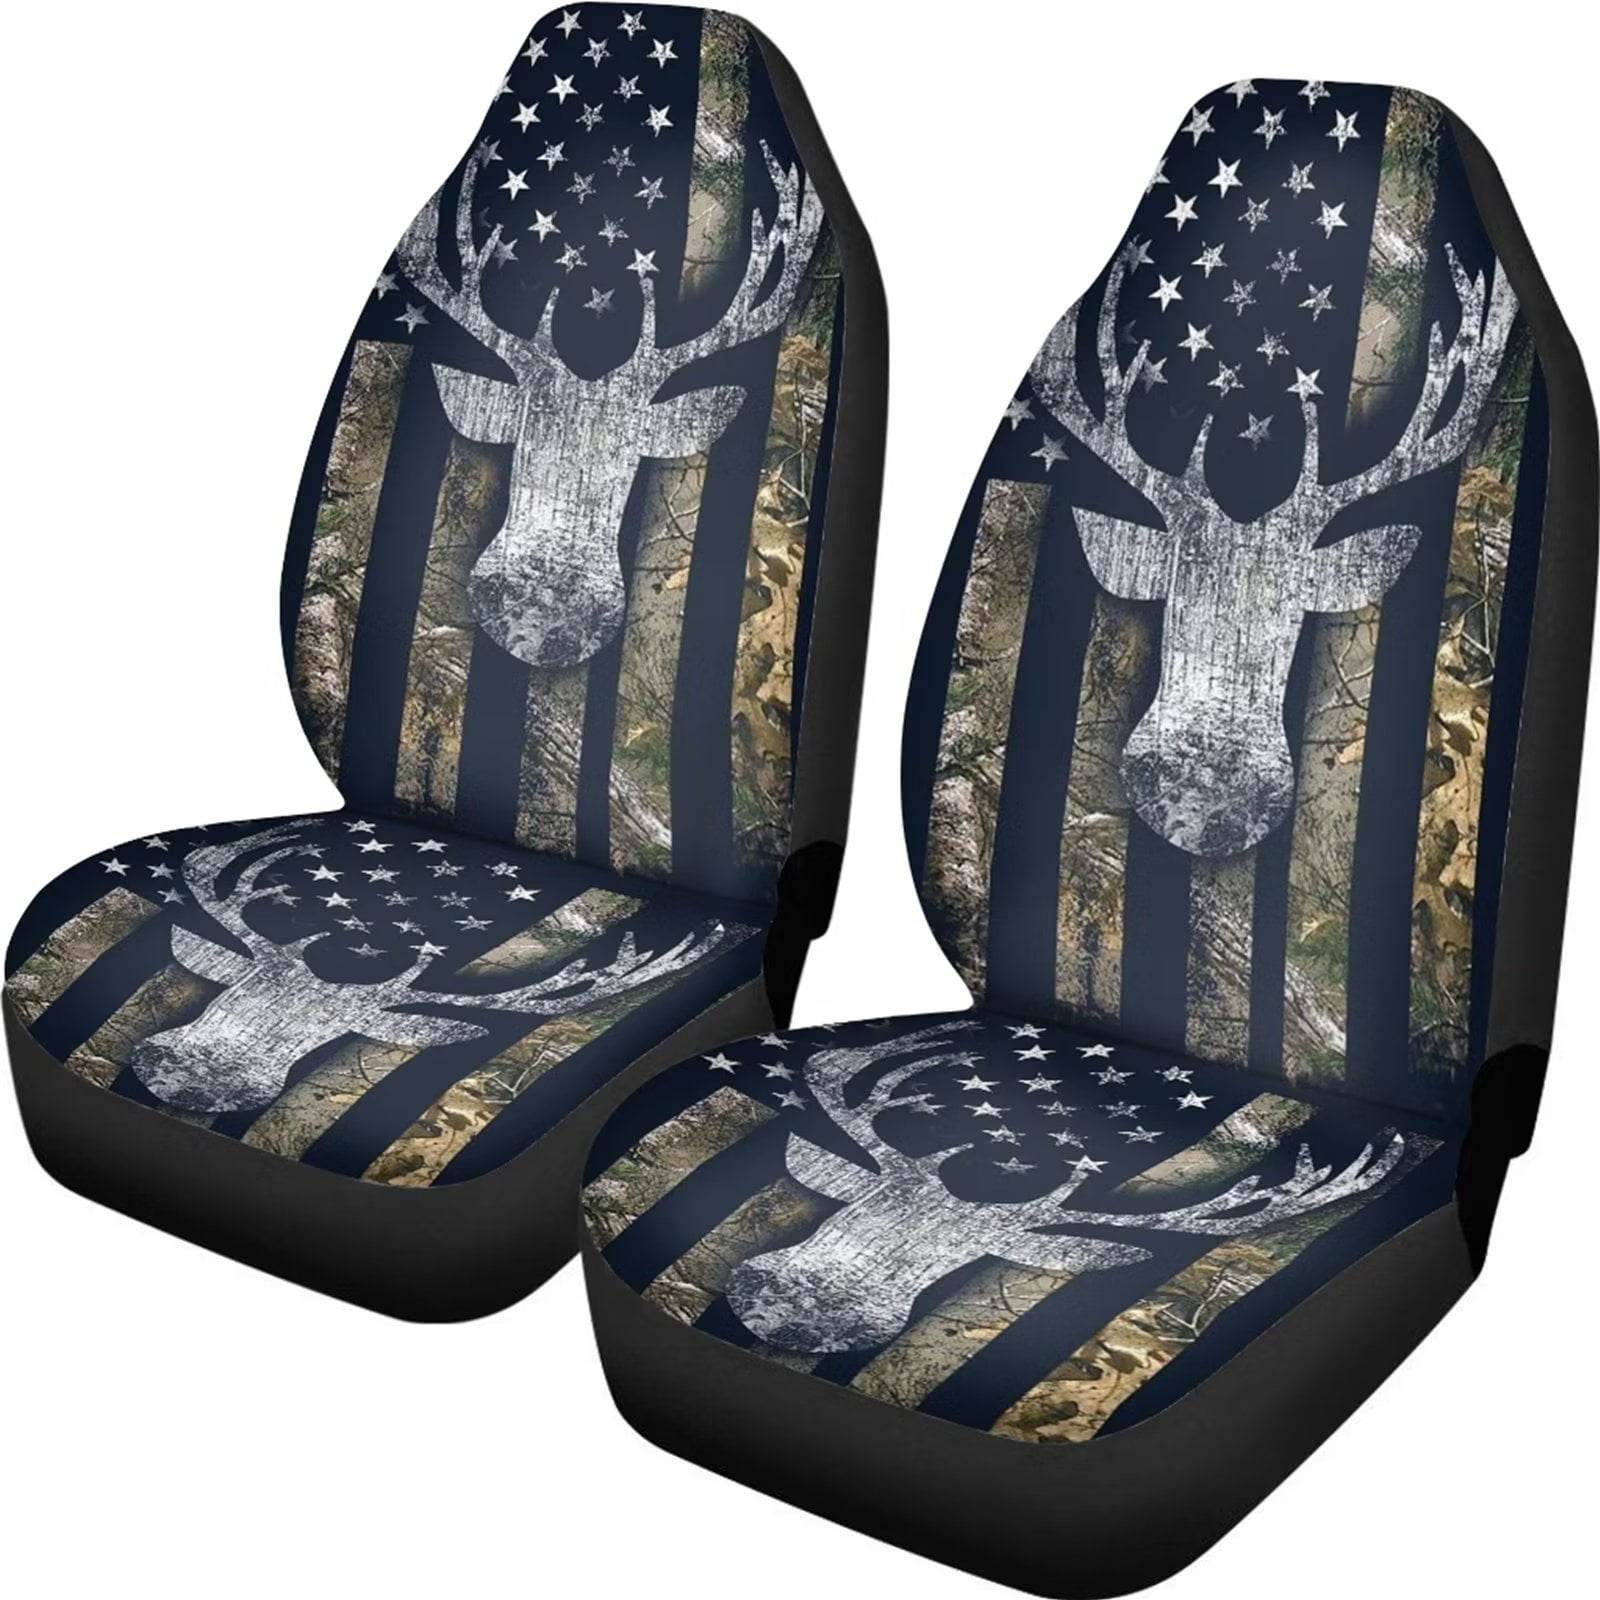  NA-1 Car Seat Covers Camouflage Bass Fishing American Flag Car  Front Seat Protectors Car Accessories Full Set Bucket Cover Universal Fit  for Car Truck Van SUV : Automotive